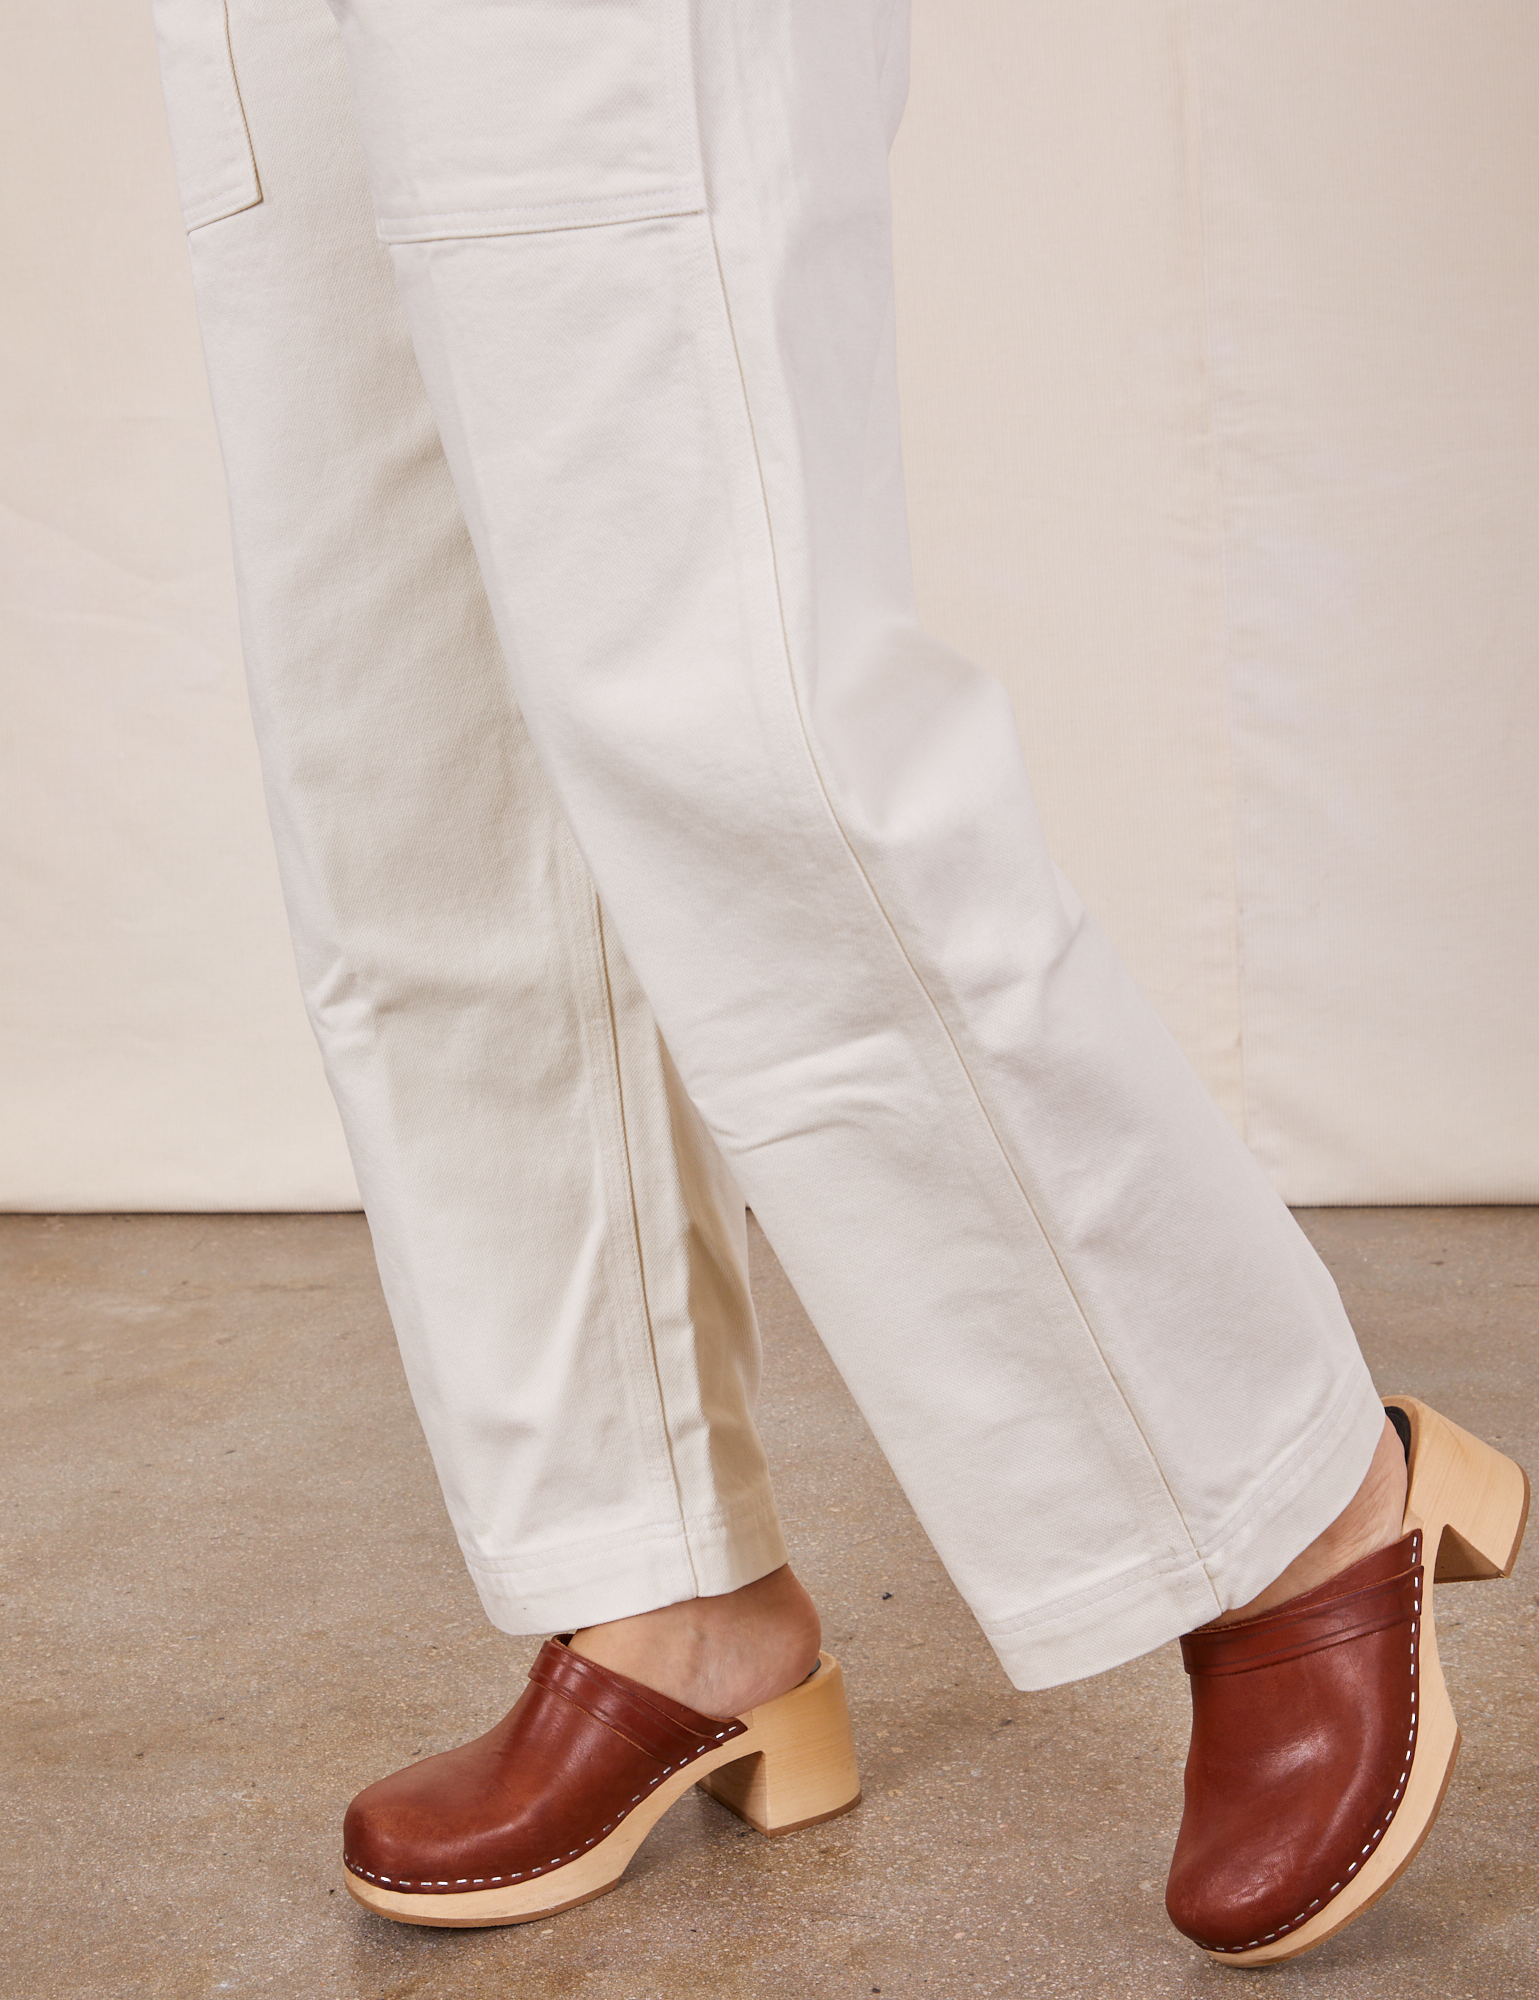 Side view pant leg close up of Original Overalls in Vintage Tee Off-White on Tiara